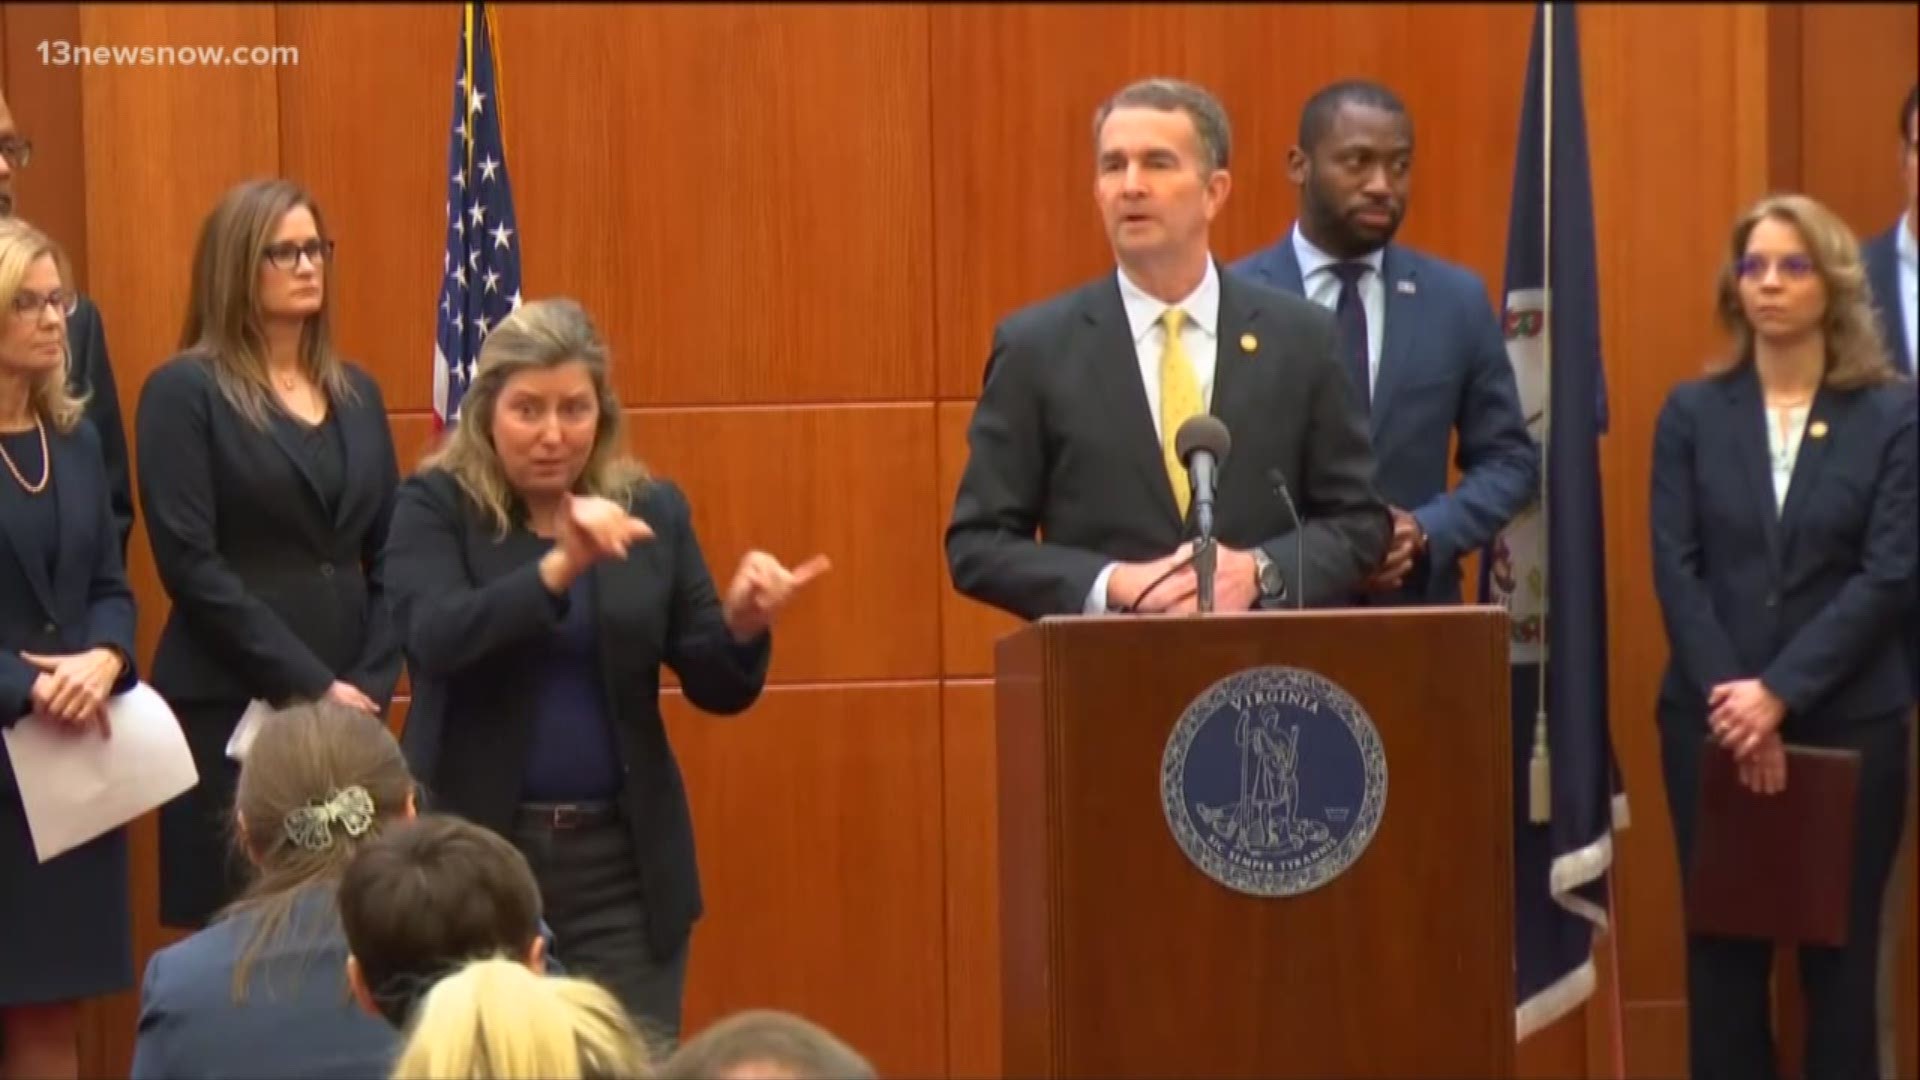 Governor Ralph Northam held a press conference to address the steps Virginia is taking to protect public health.